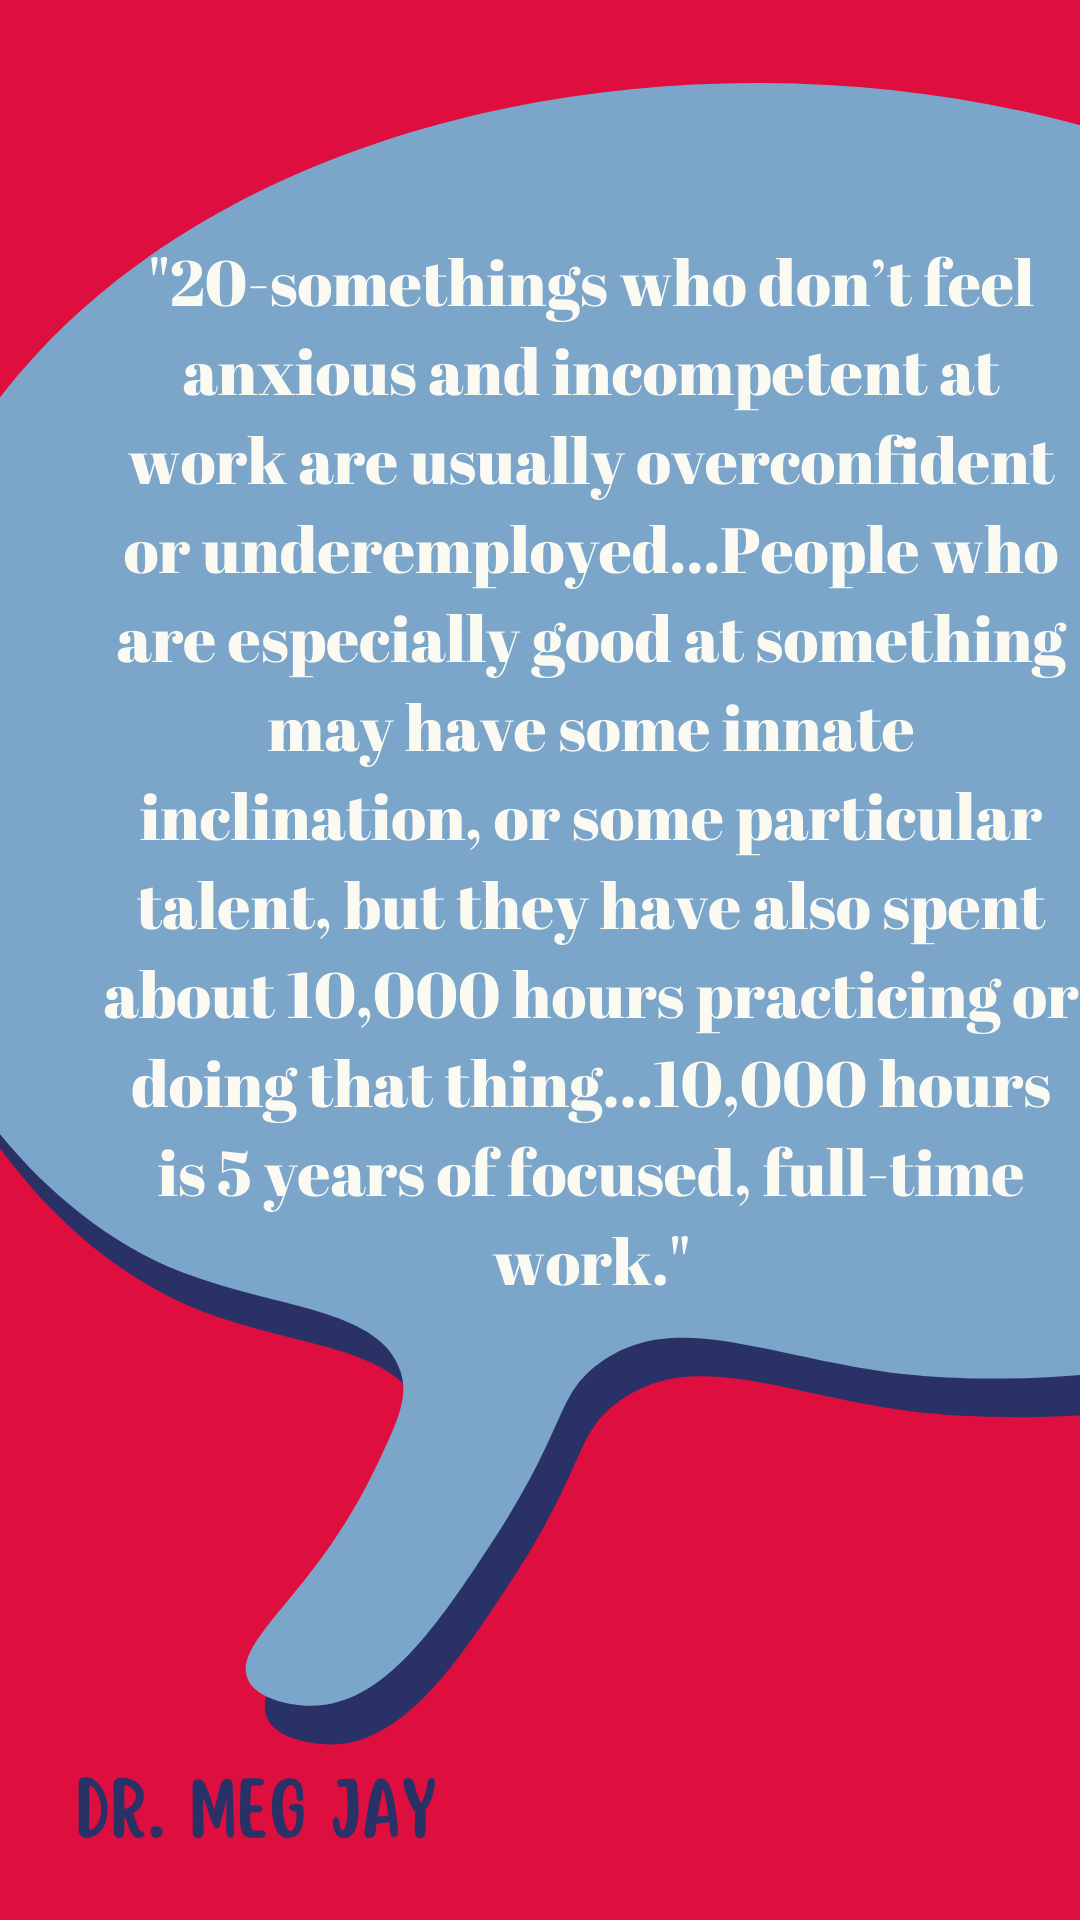 “Twentysomethings who don’t feel anxious and incompetent at work are usually overconfident or underemployed. People who are especially good at something may have some innate inclination, or some particular talent, but they have also spent about 10,000 hours practicing or doing that thing. Ten thousand hours is five years of focused, full-time work,” said Dr. Meg Jay.